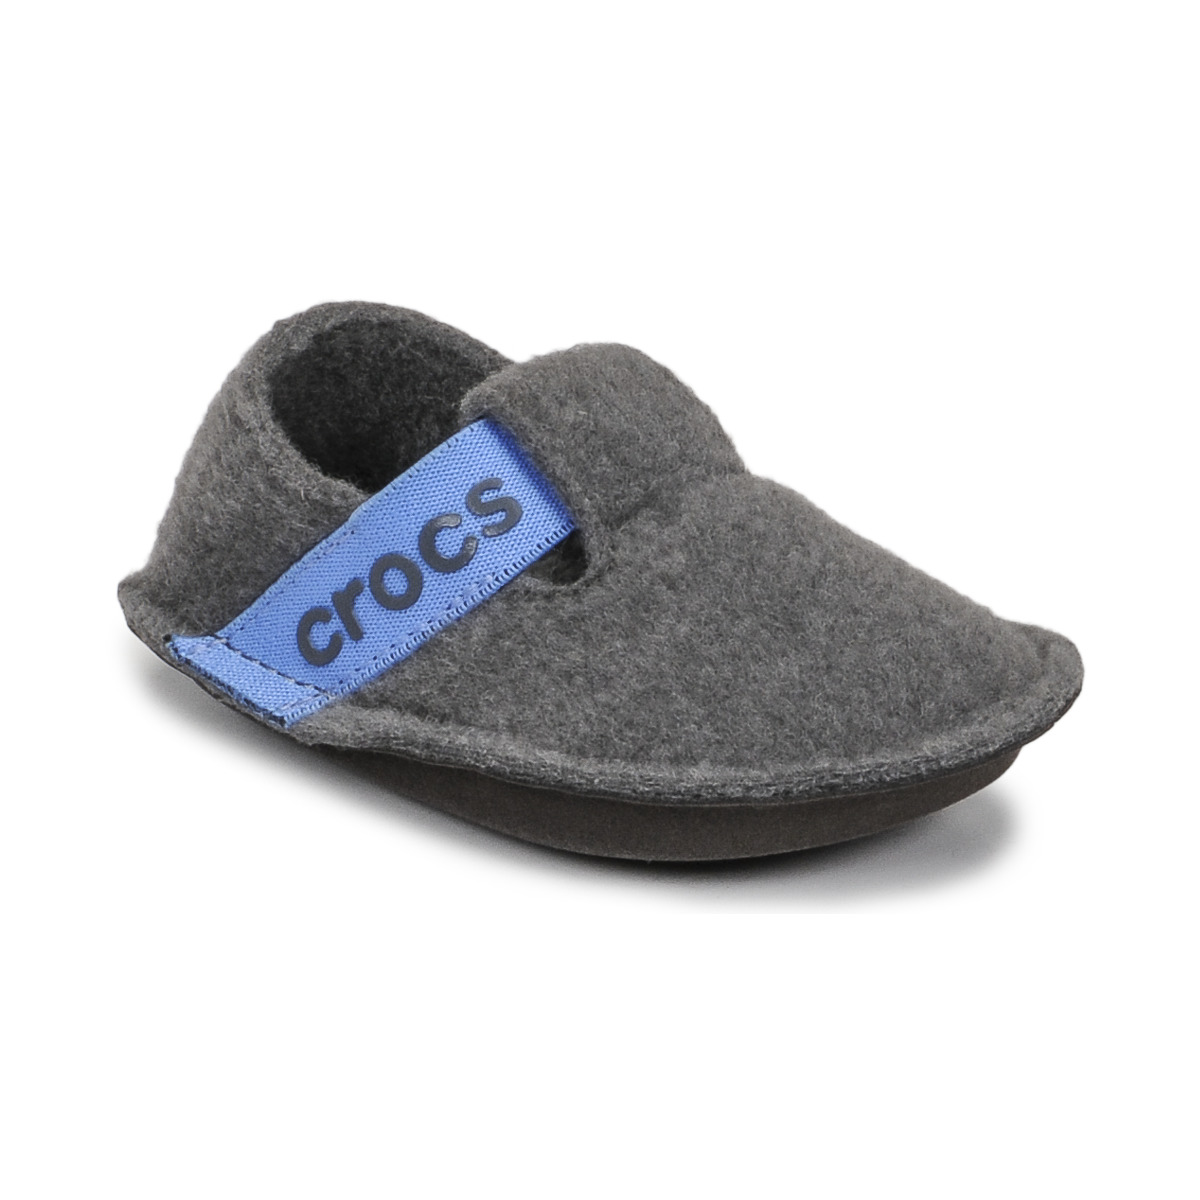 Crocs CLASSIC SLIPPER K / Blue - Free delivery | Spartoo NET ! - Shoes Slippers Child USD/$27.00